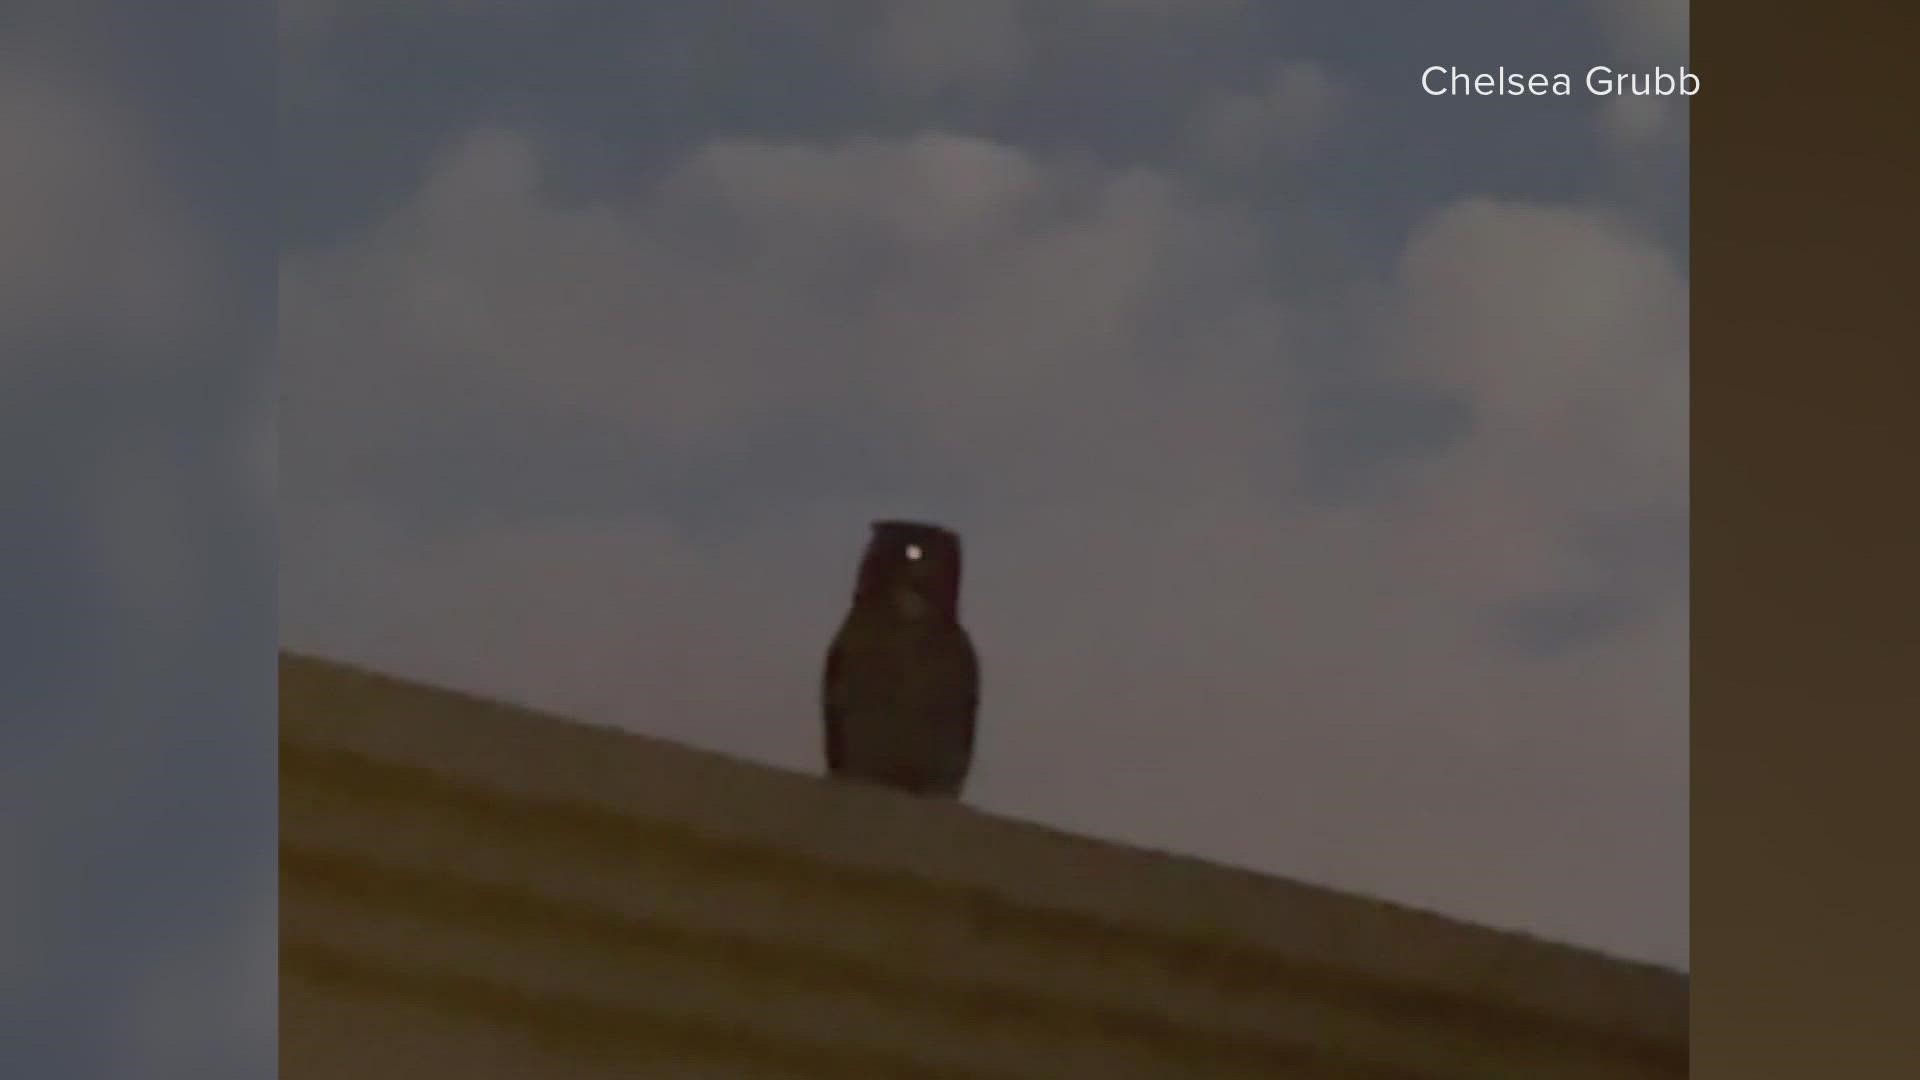 The Scottsdale woman was on a walk when they encountered the owl perched on a tree. The owl flew toward them trying to get her dog.